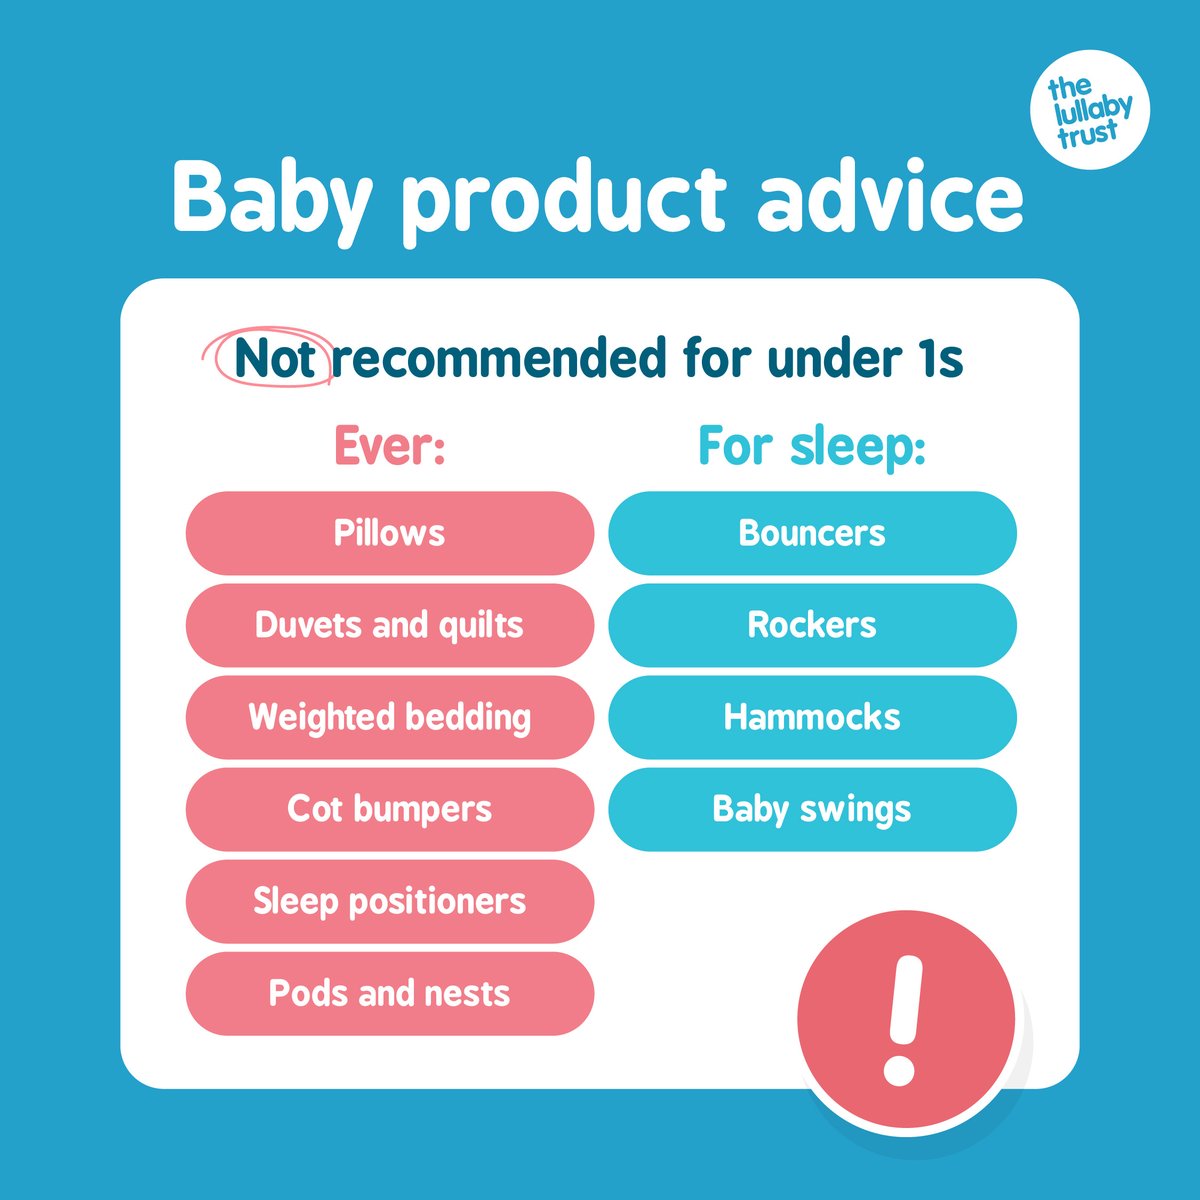 Babies can cost a fortune (!), so here are a few items you can cross off your shopping list! These products are either not recommended for babies at all, or not recommended for babies to sleep in. See image.